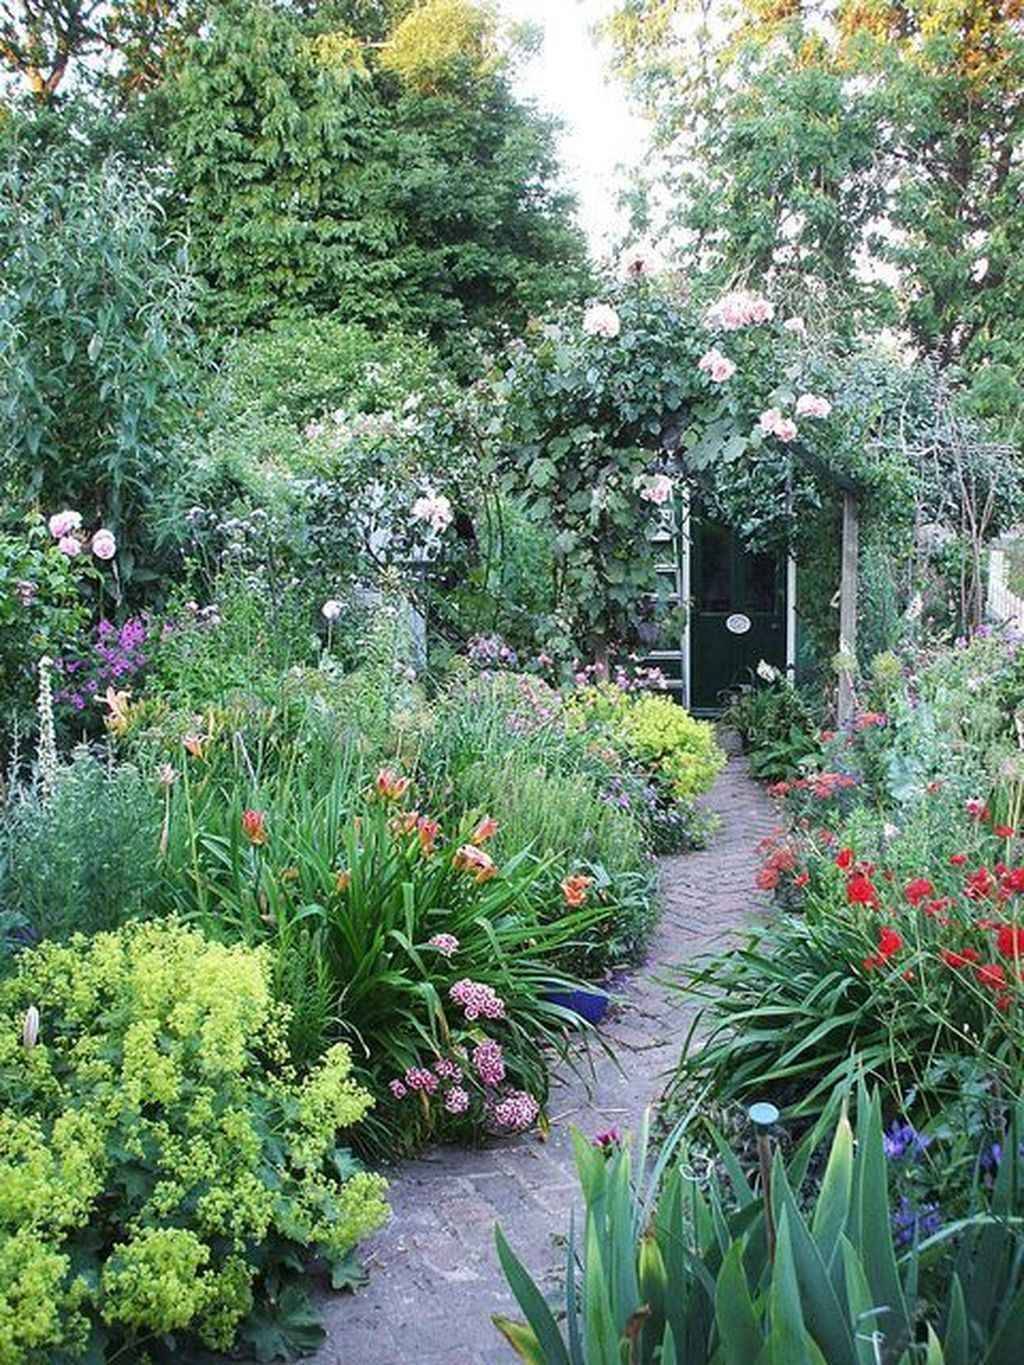 Our Home Small Cottage Garden Ideas